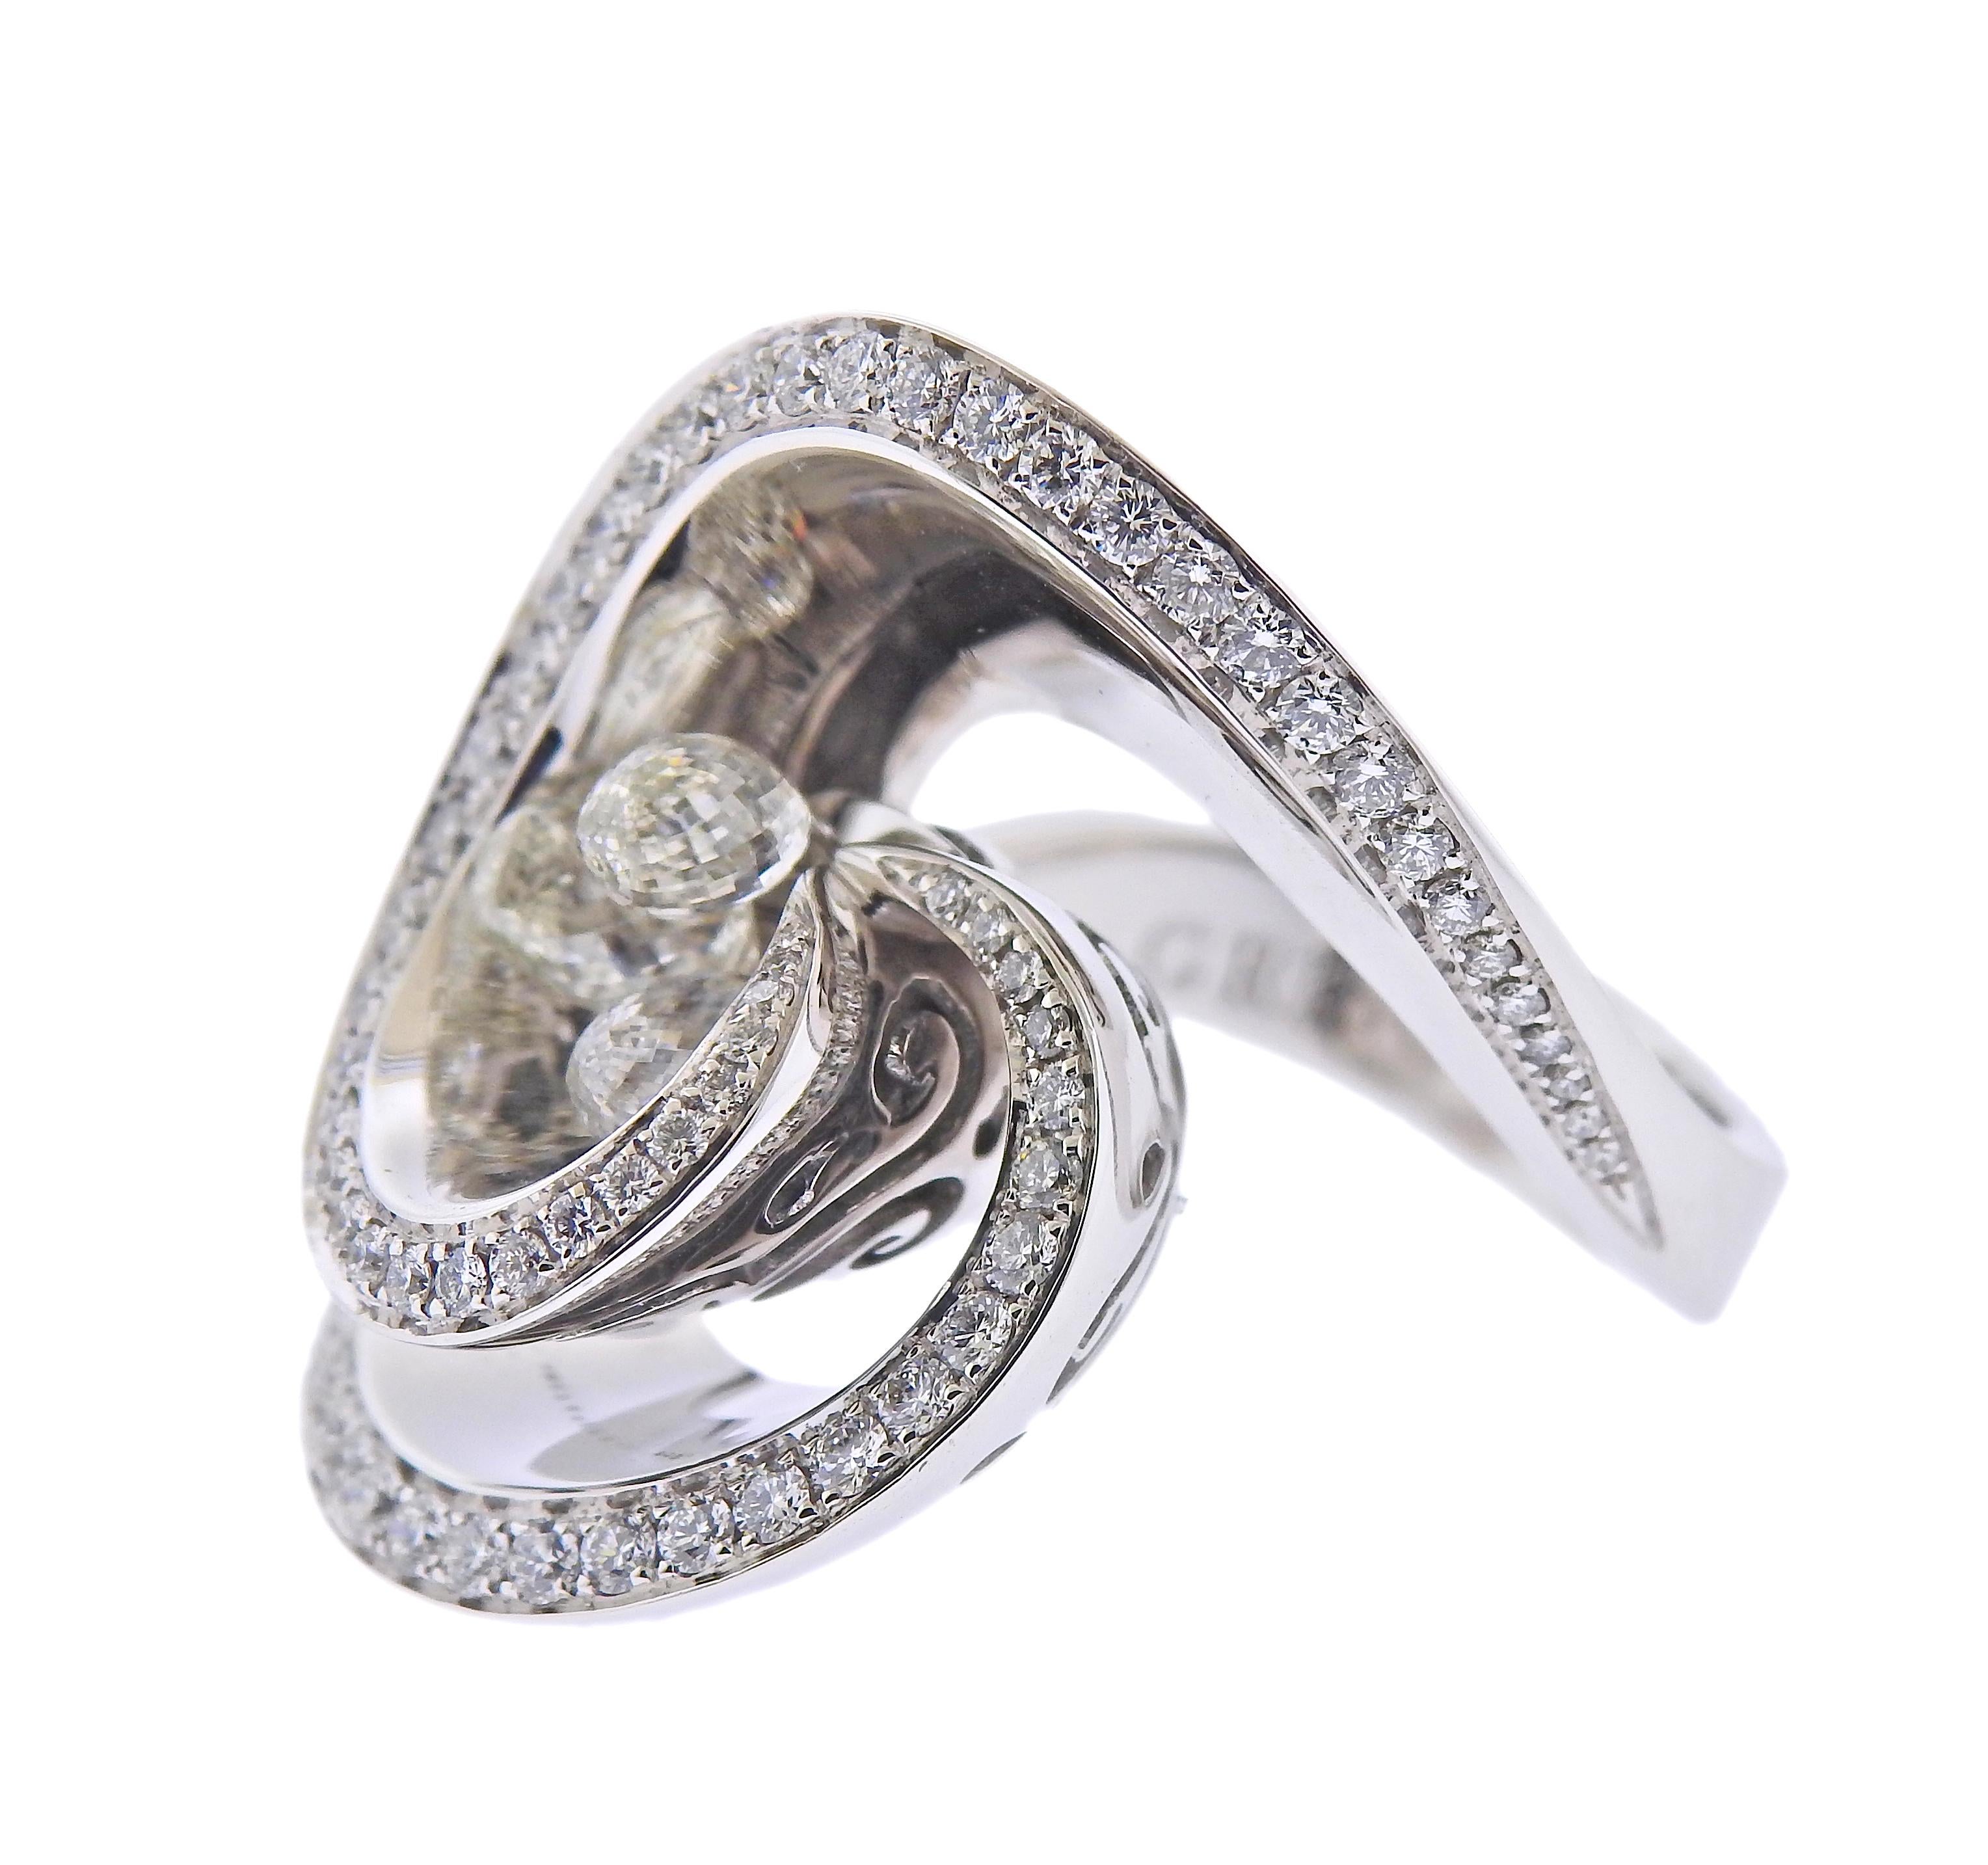 Brand new 18k white gold ring by De Grisogono. Set with a total of 2.35ctw VVS F/G diamonds, three briolette cuts are 1.50ctw, & round diamonds are 0.85ctw. Ring size - 7 1/4 (55) , ring top - 25mm wide. Marked - de Grisogono, Au750, serial number.